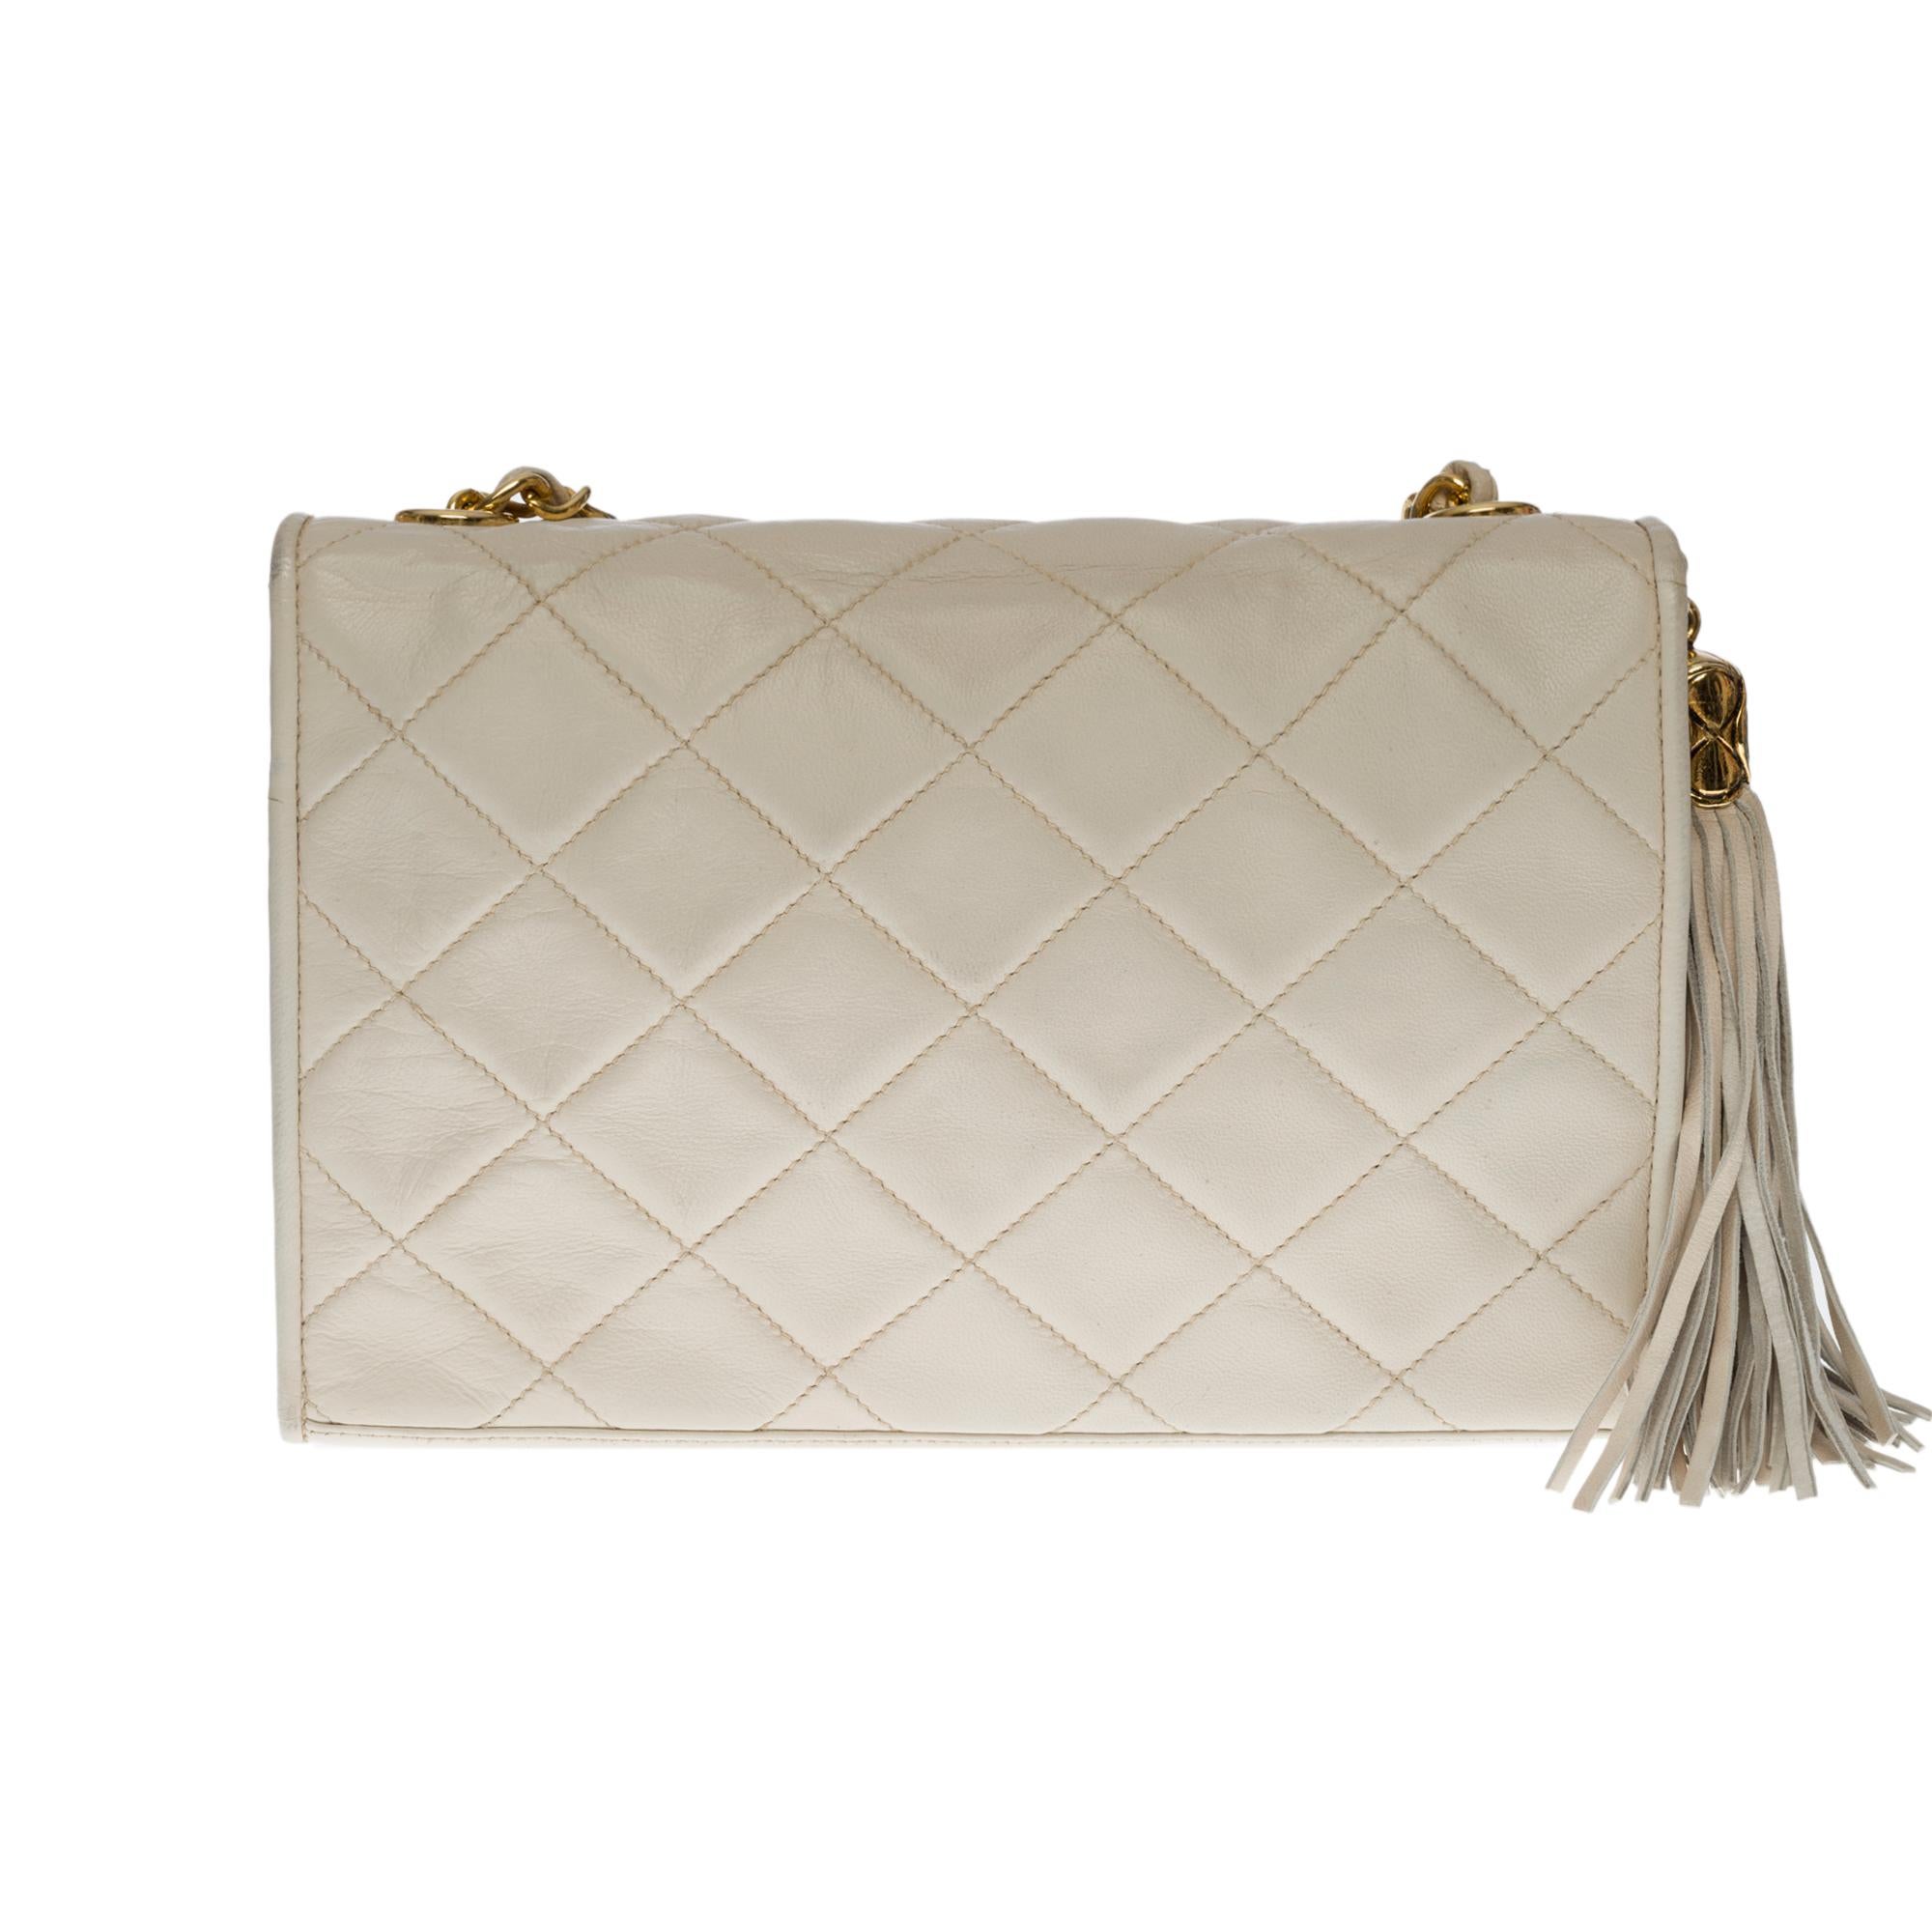 Beautiful vintage Chanel Full Flap handbag in white quilted lambskin leather, gold-tone metal hardware, a gold-tone metal chain handle interlaced with white leather for a shoulder and shoulder strap
Flap closure, gold-tone metal magnetic